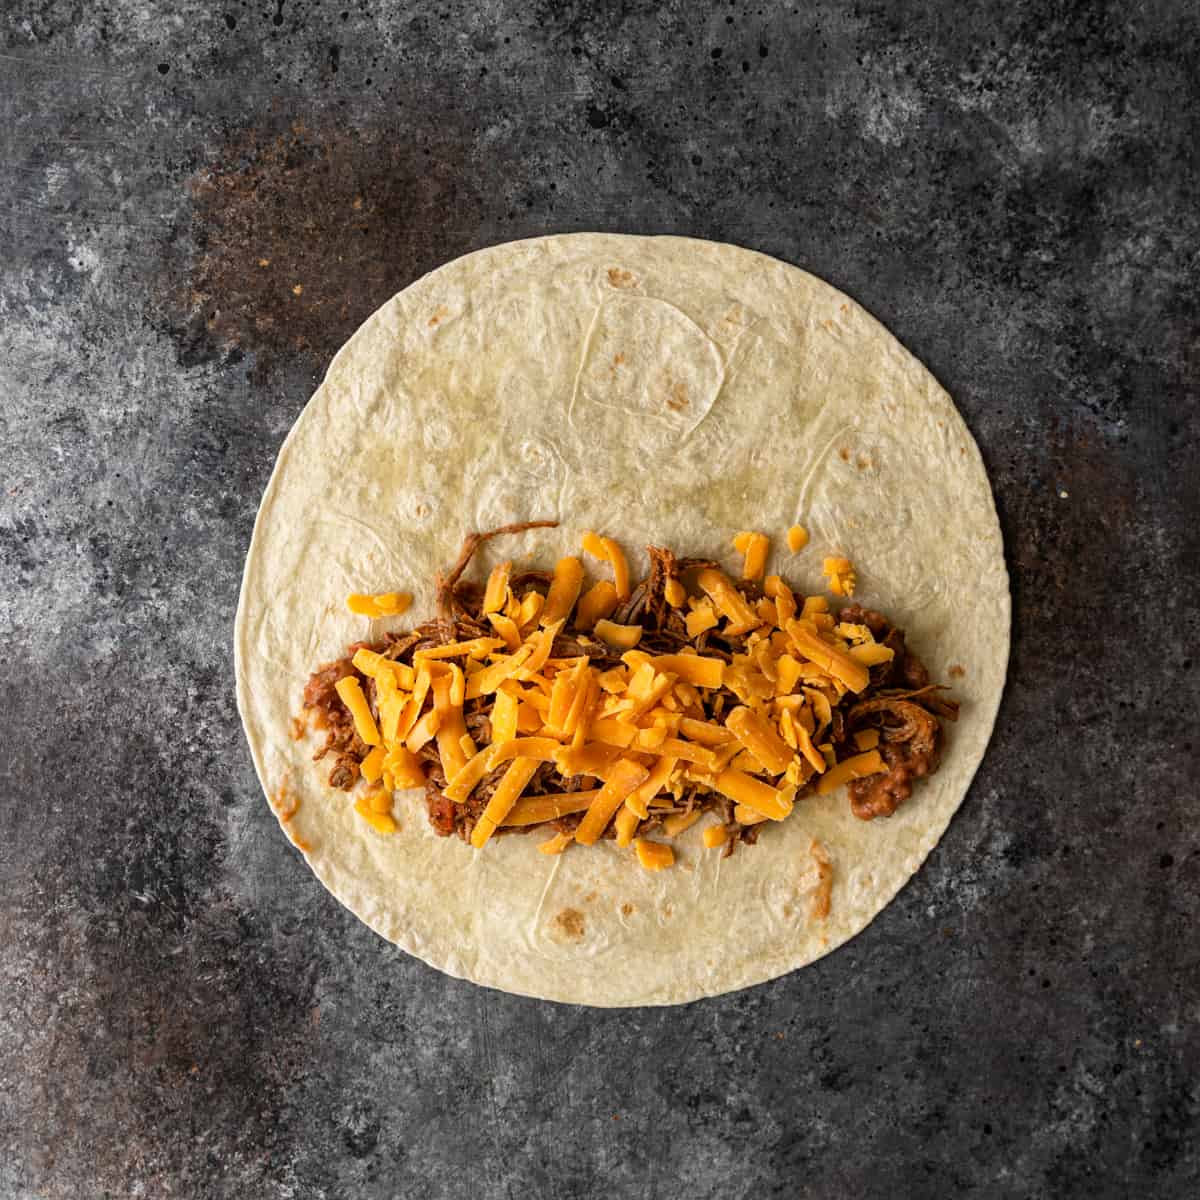 Top view of a tortilla with refried beans, shredded beef, and cheddar cheese.